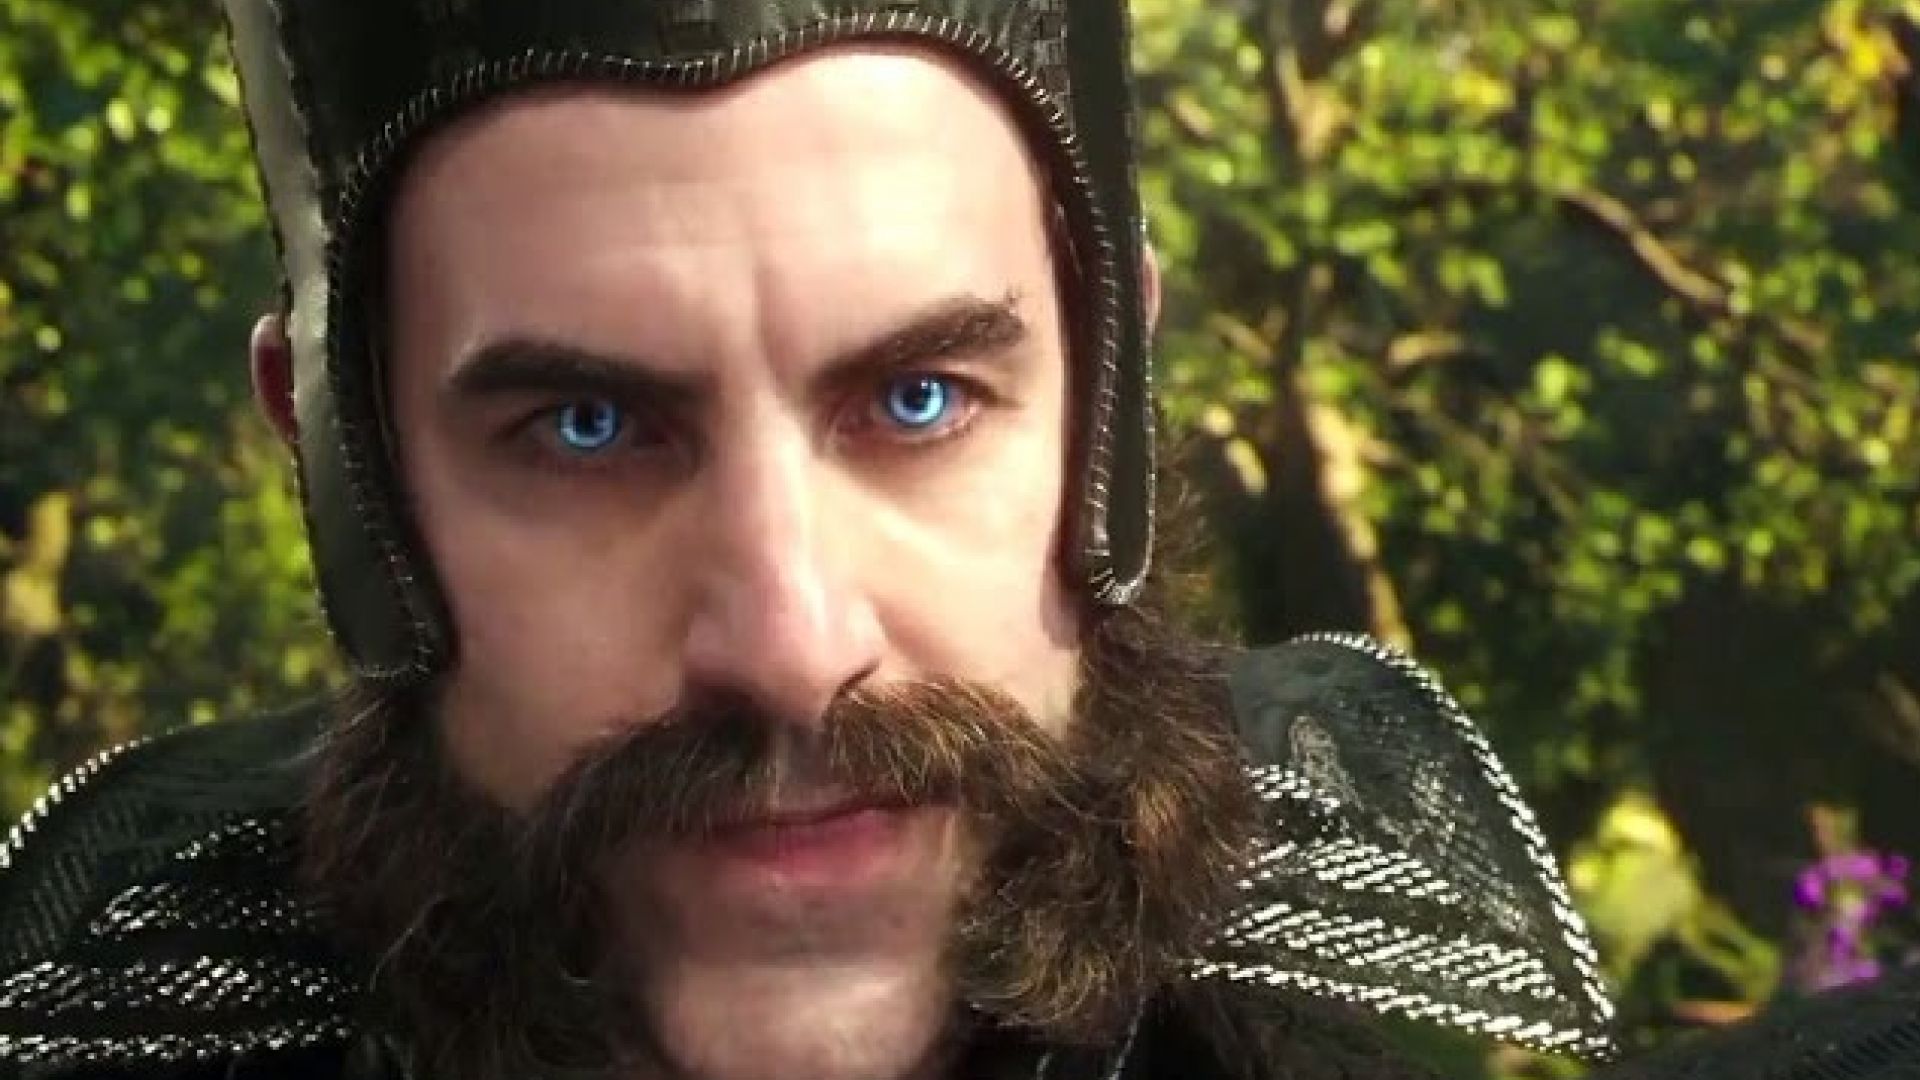 The Hatter mocks Time in new clip for Alice Through The Look